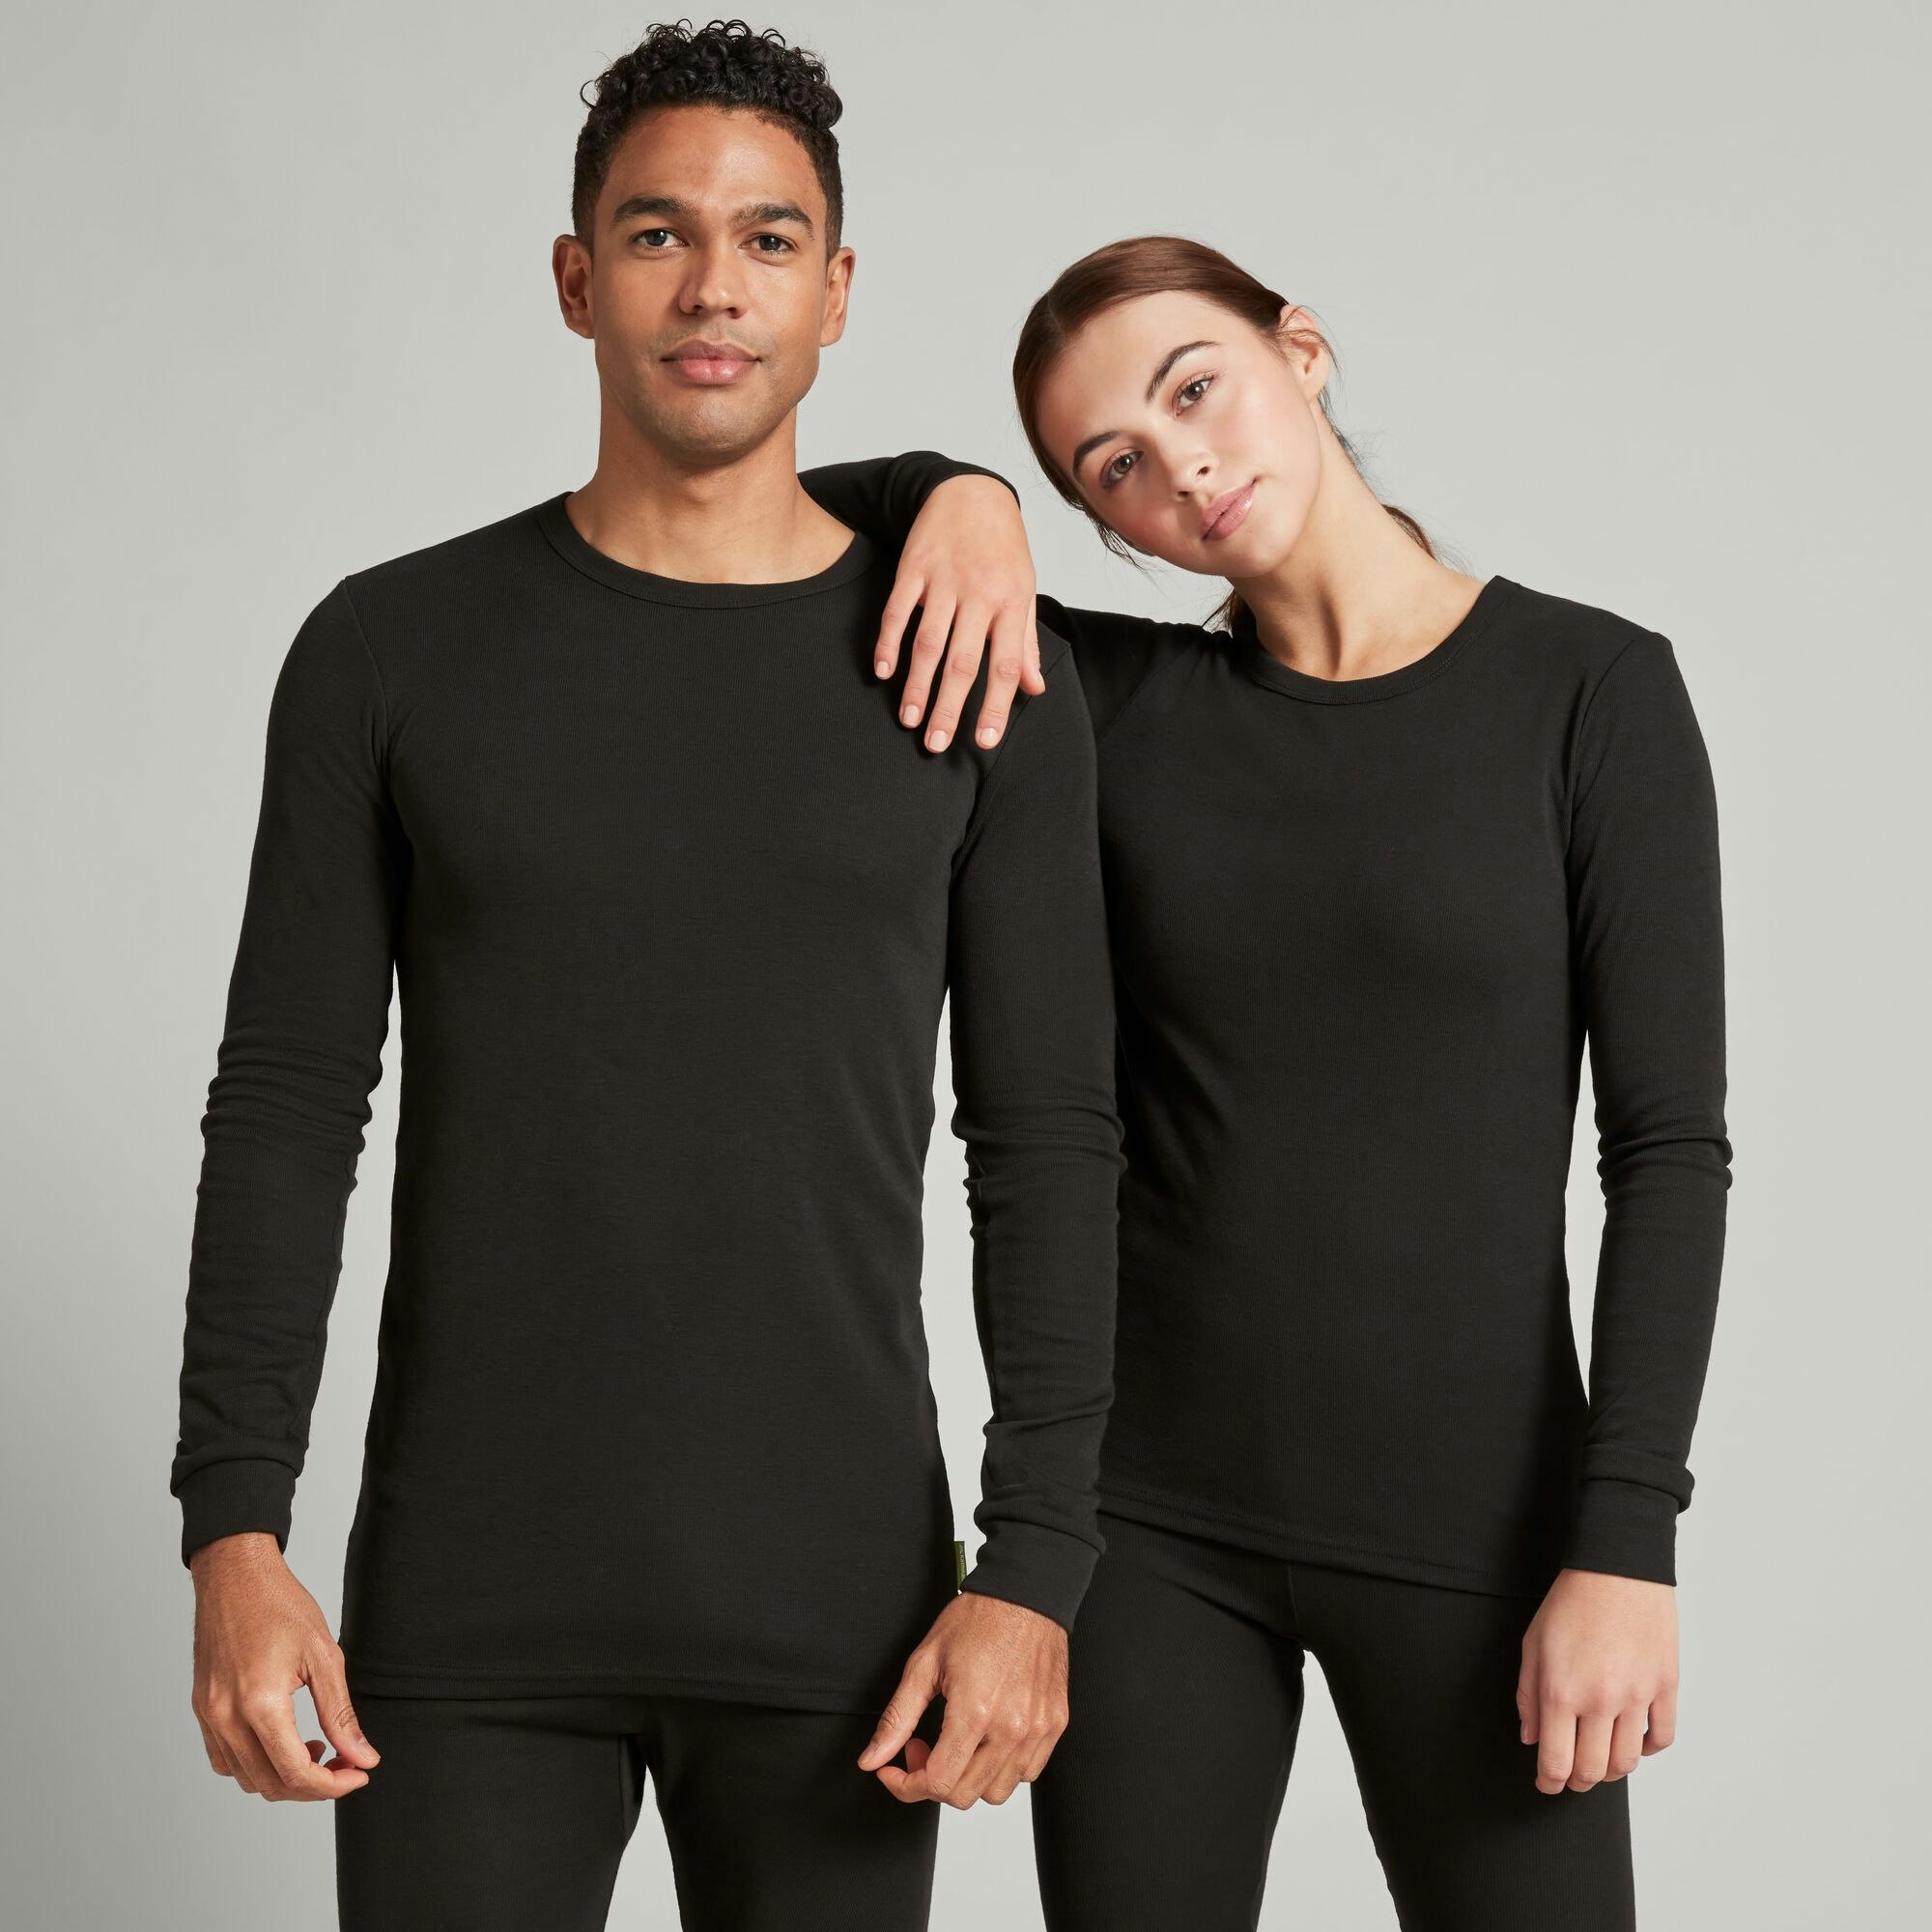 Buy Women's Thermal Tops & Base Layers